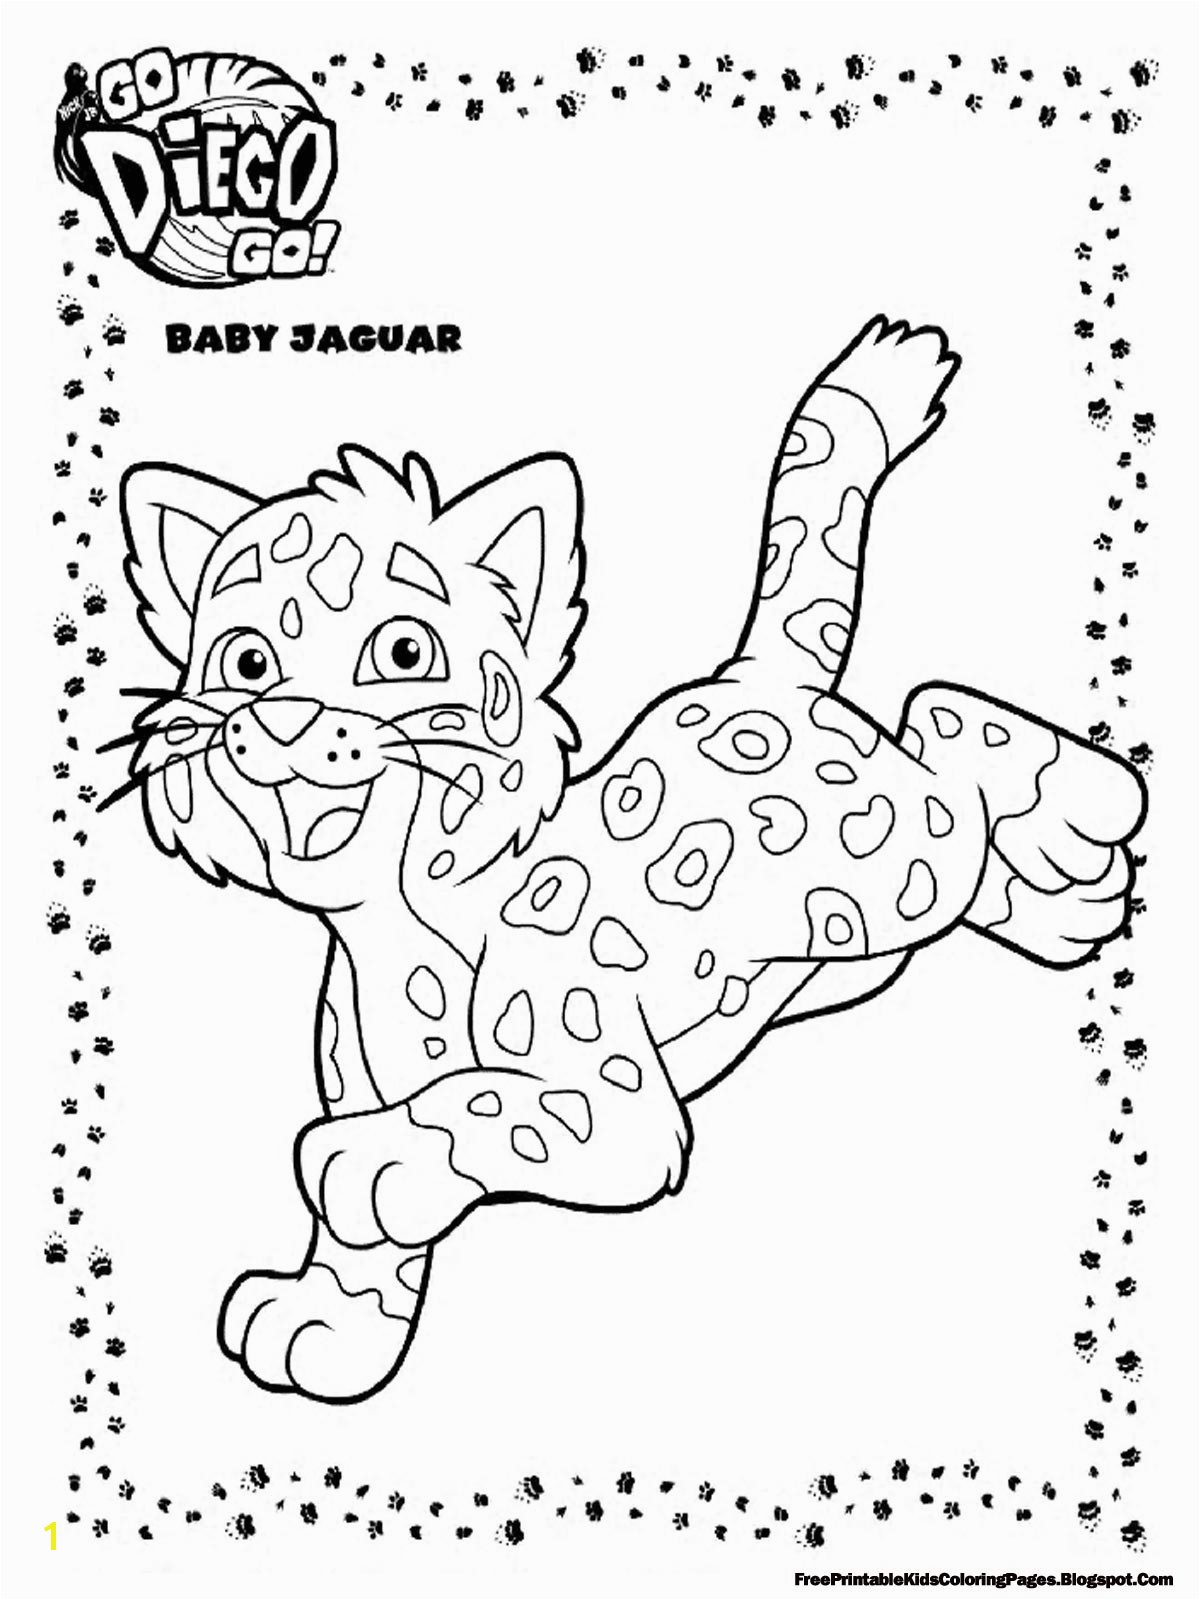 Diego and Baby Jaguar Coloring Pages Baby Jaguar Coloring Pages Cool Coloring Pages